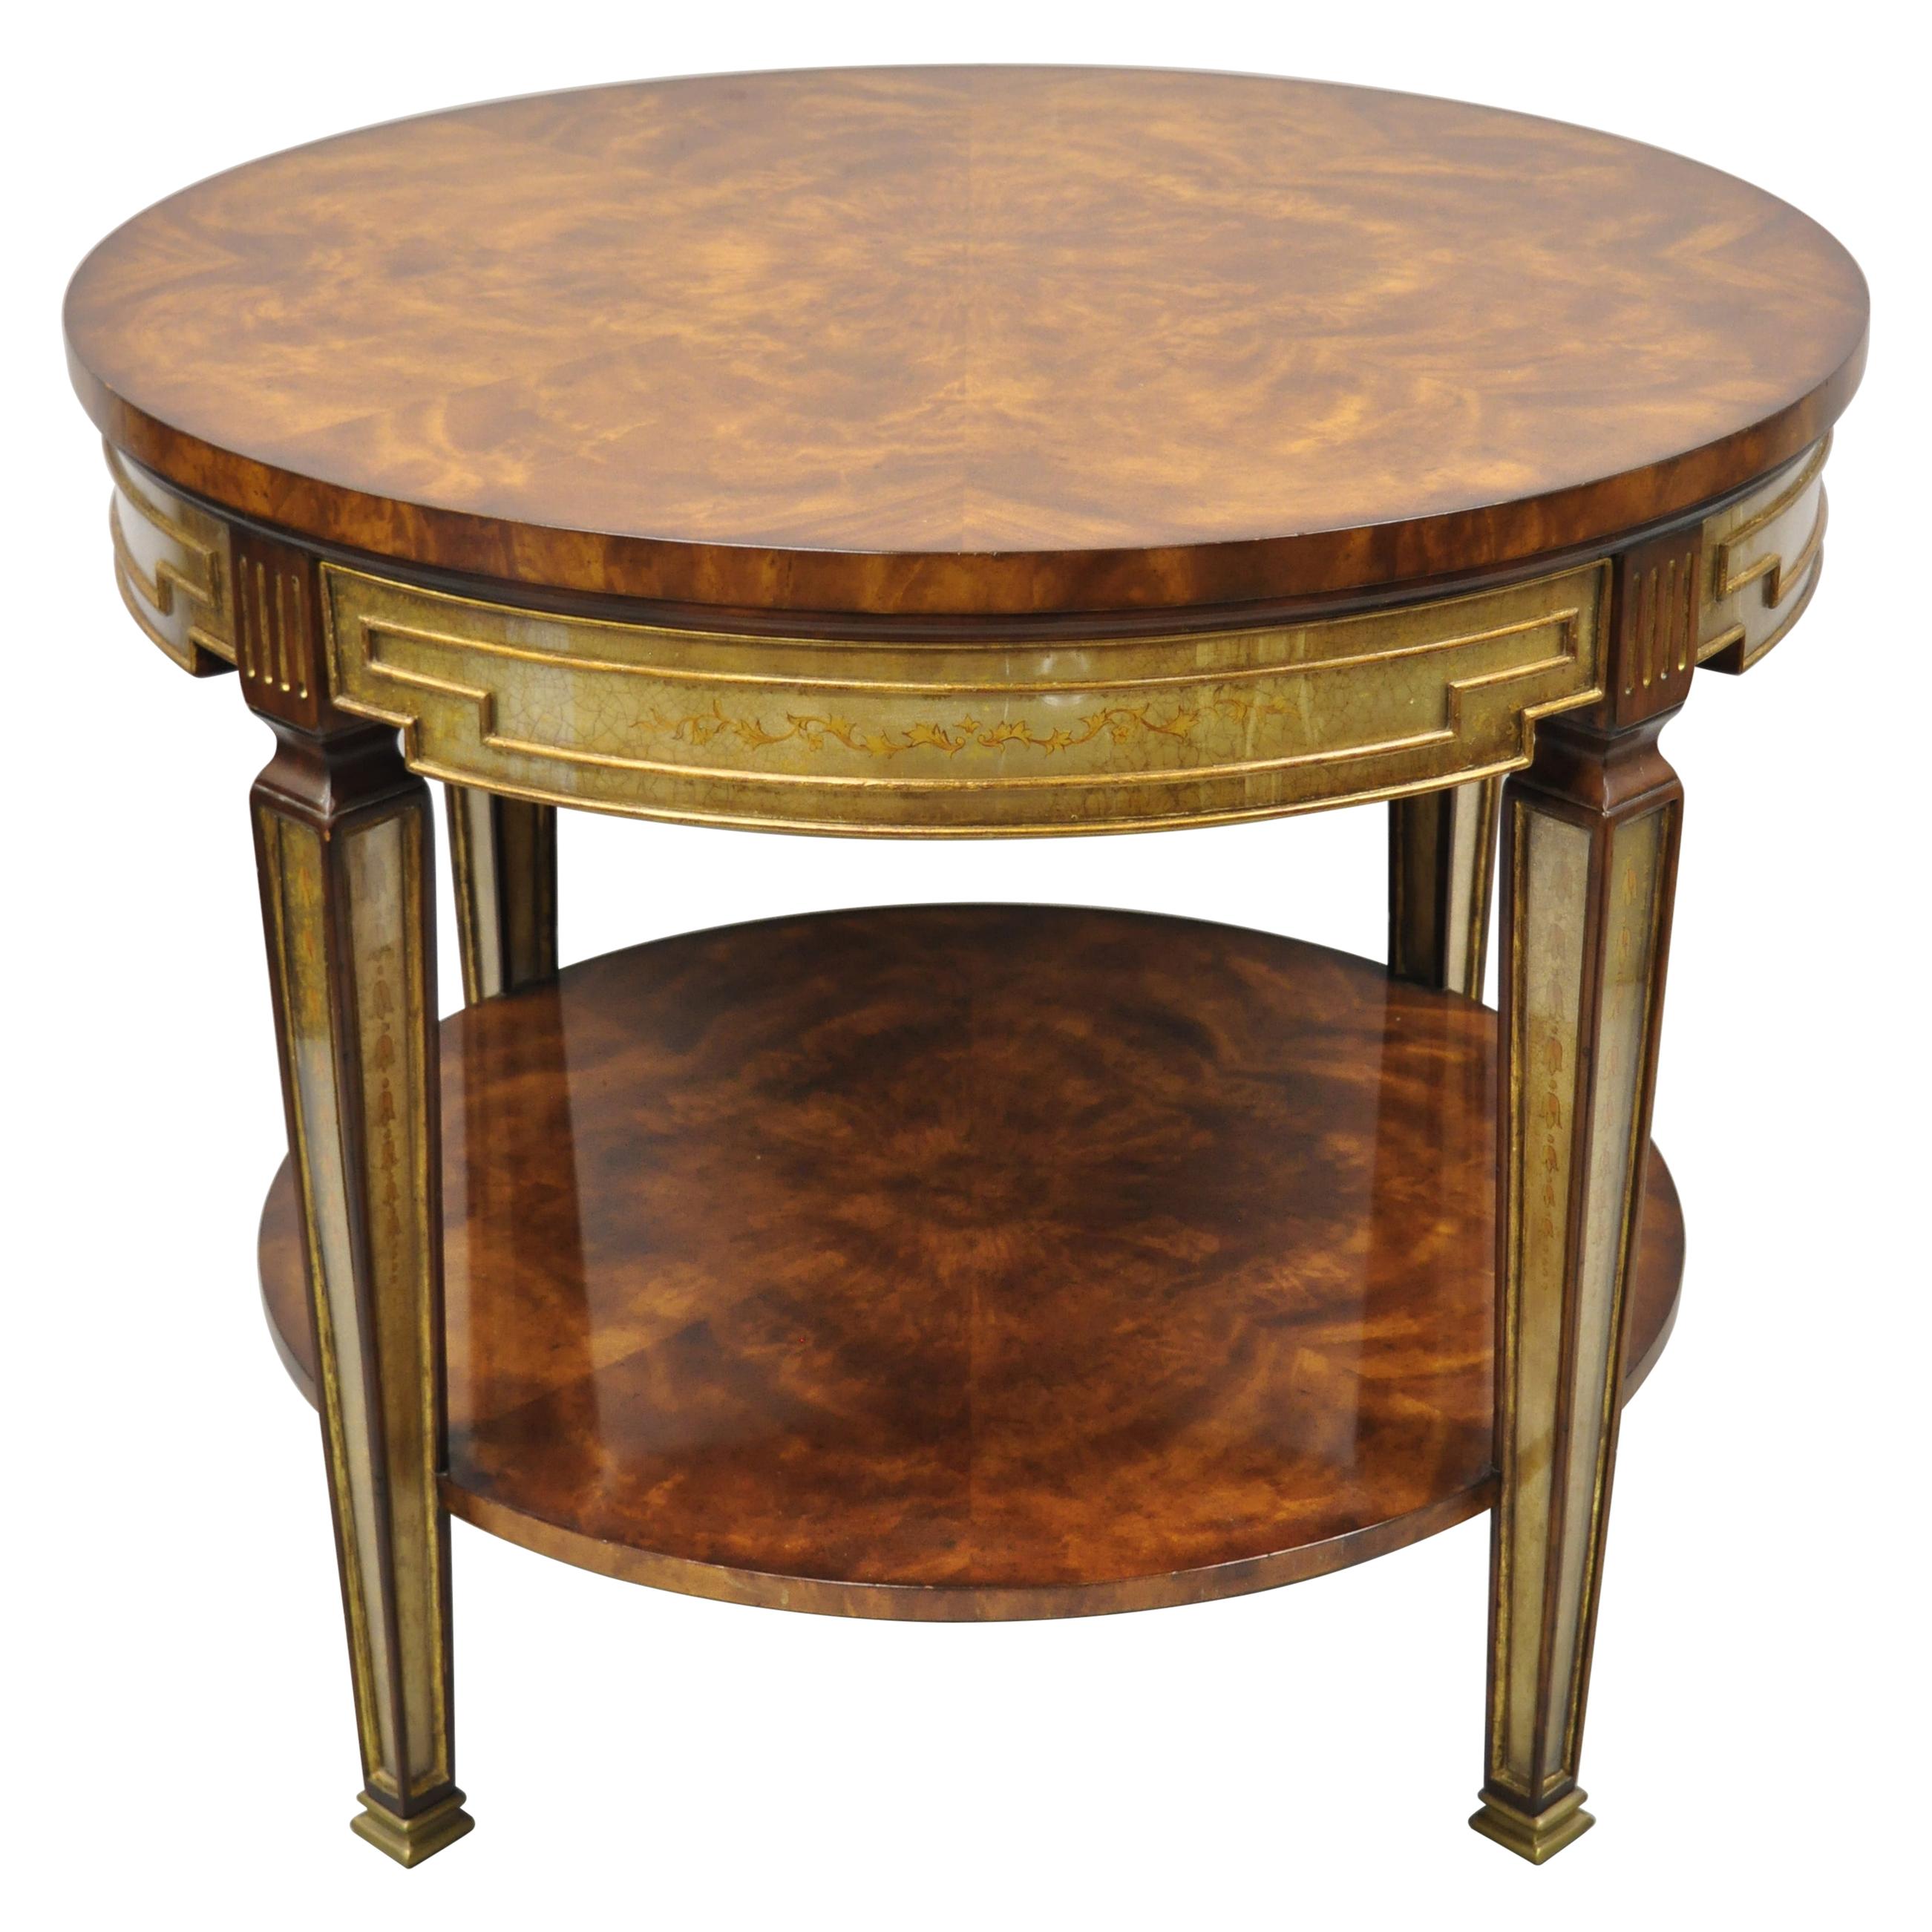 Theodore Alexander Regency One Drawer Eglomise Round Occasional Side Table